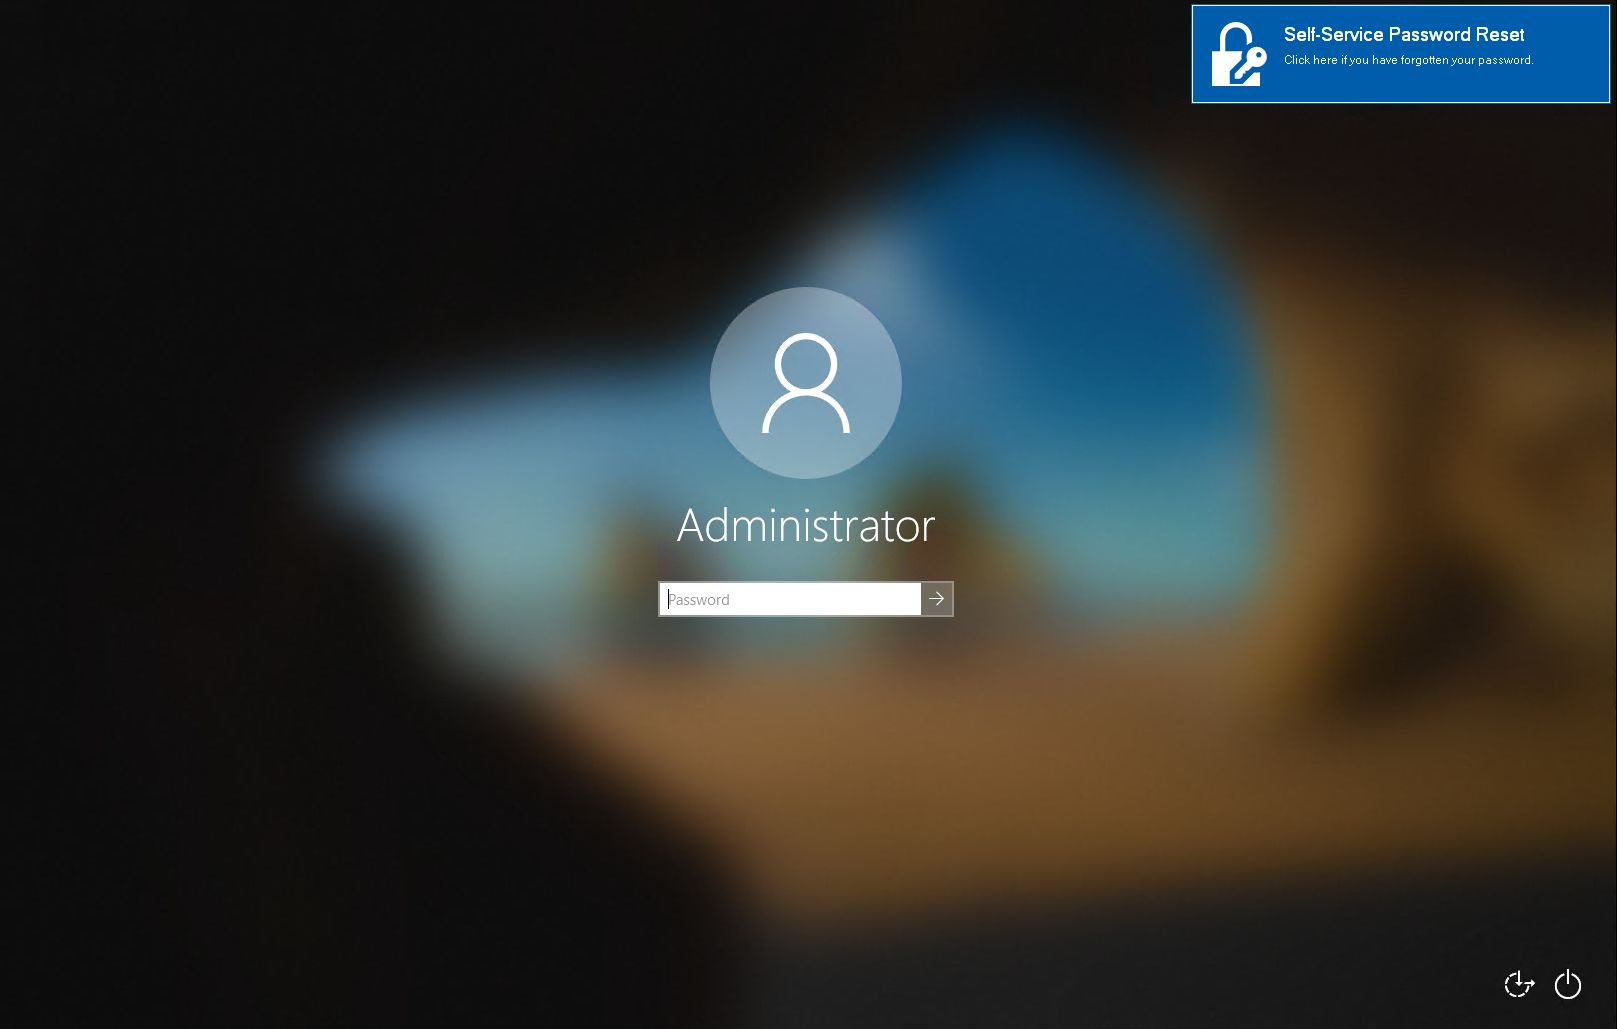 Credential Provider at the login Screen Helps the end-user